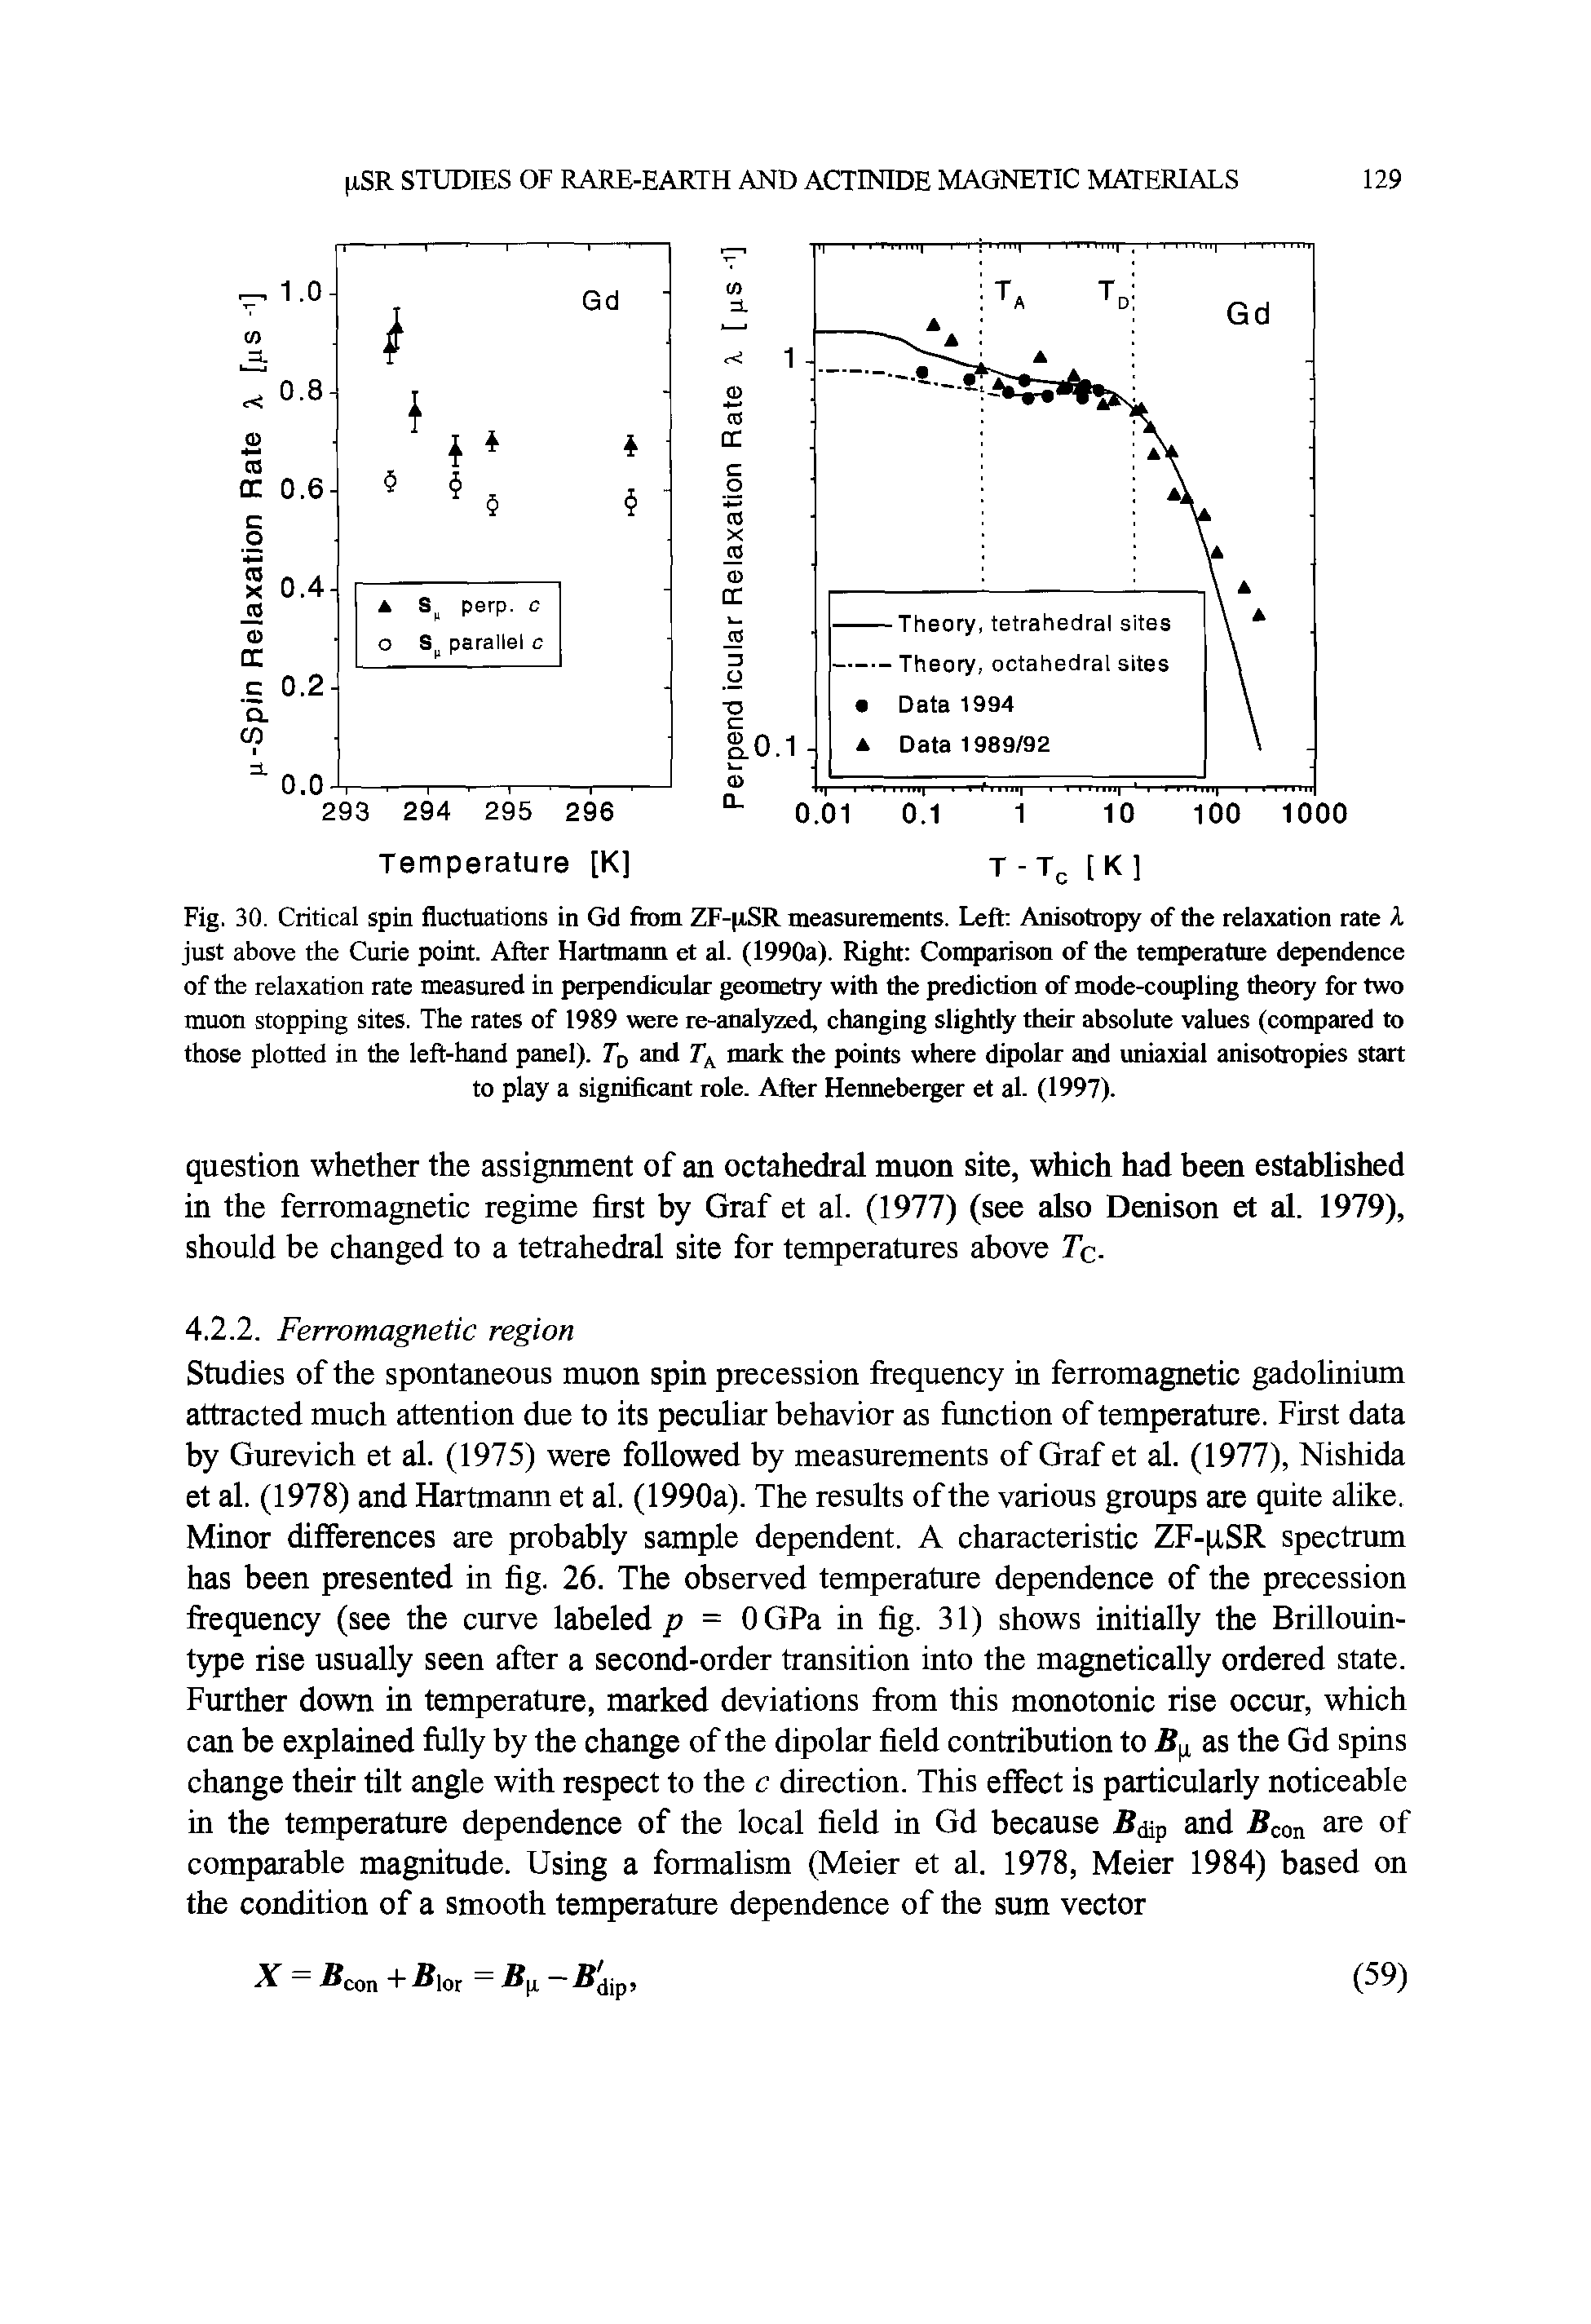 Fig. 30. Critical spin fluctuations in Gd ftom ZF- iSR measurements. Left Anisotropy of ftie relaxation rate A just above the Curie point. After Hartmann et al. (1990a). Right Comparison of the temperature dependence of the relaxation rate measured in perpendicular geometry with the prediction of mode-coiq>ling ftieory for two muon stopping sites. The rates of 1989 were re-analyzed, changing slightly their absolute values (compared to those plotted in the left-hand panel). Tq and 7) mark the points where dipolar and uniaxial anisotropies start to play a significant role. After Hennebeiger et al. (1997).